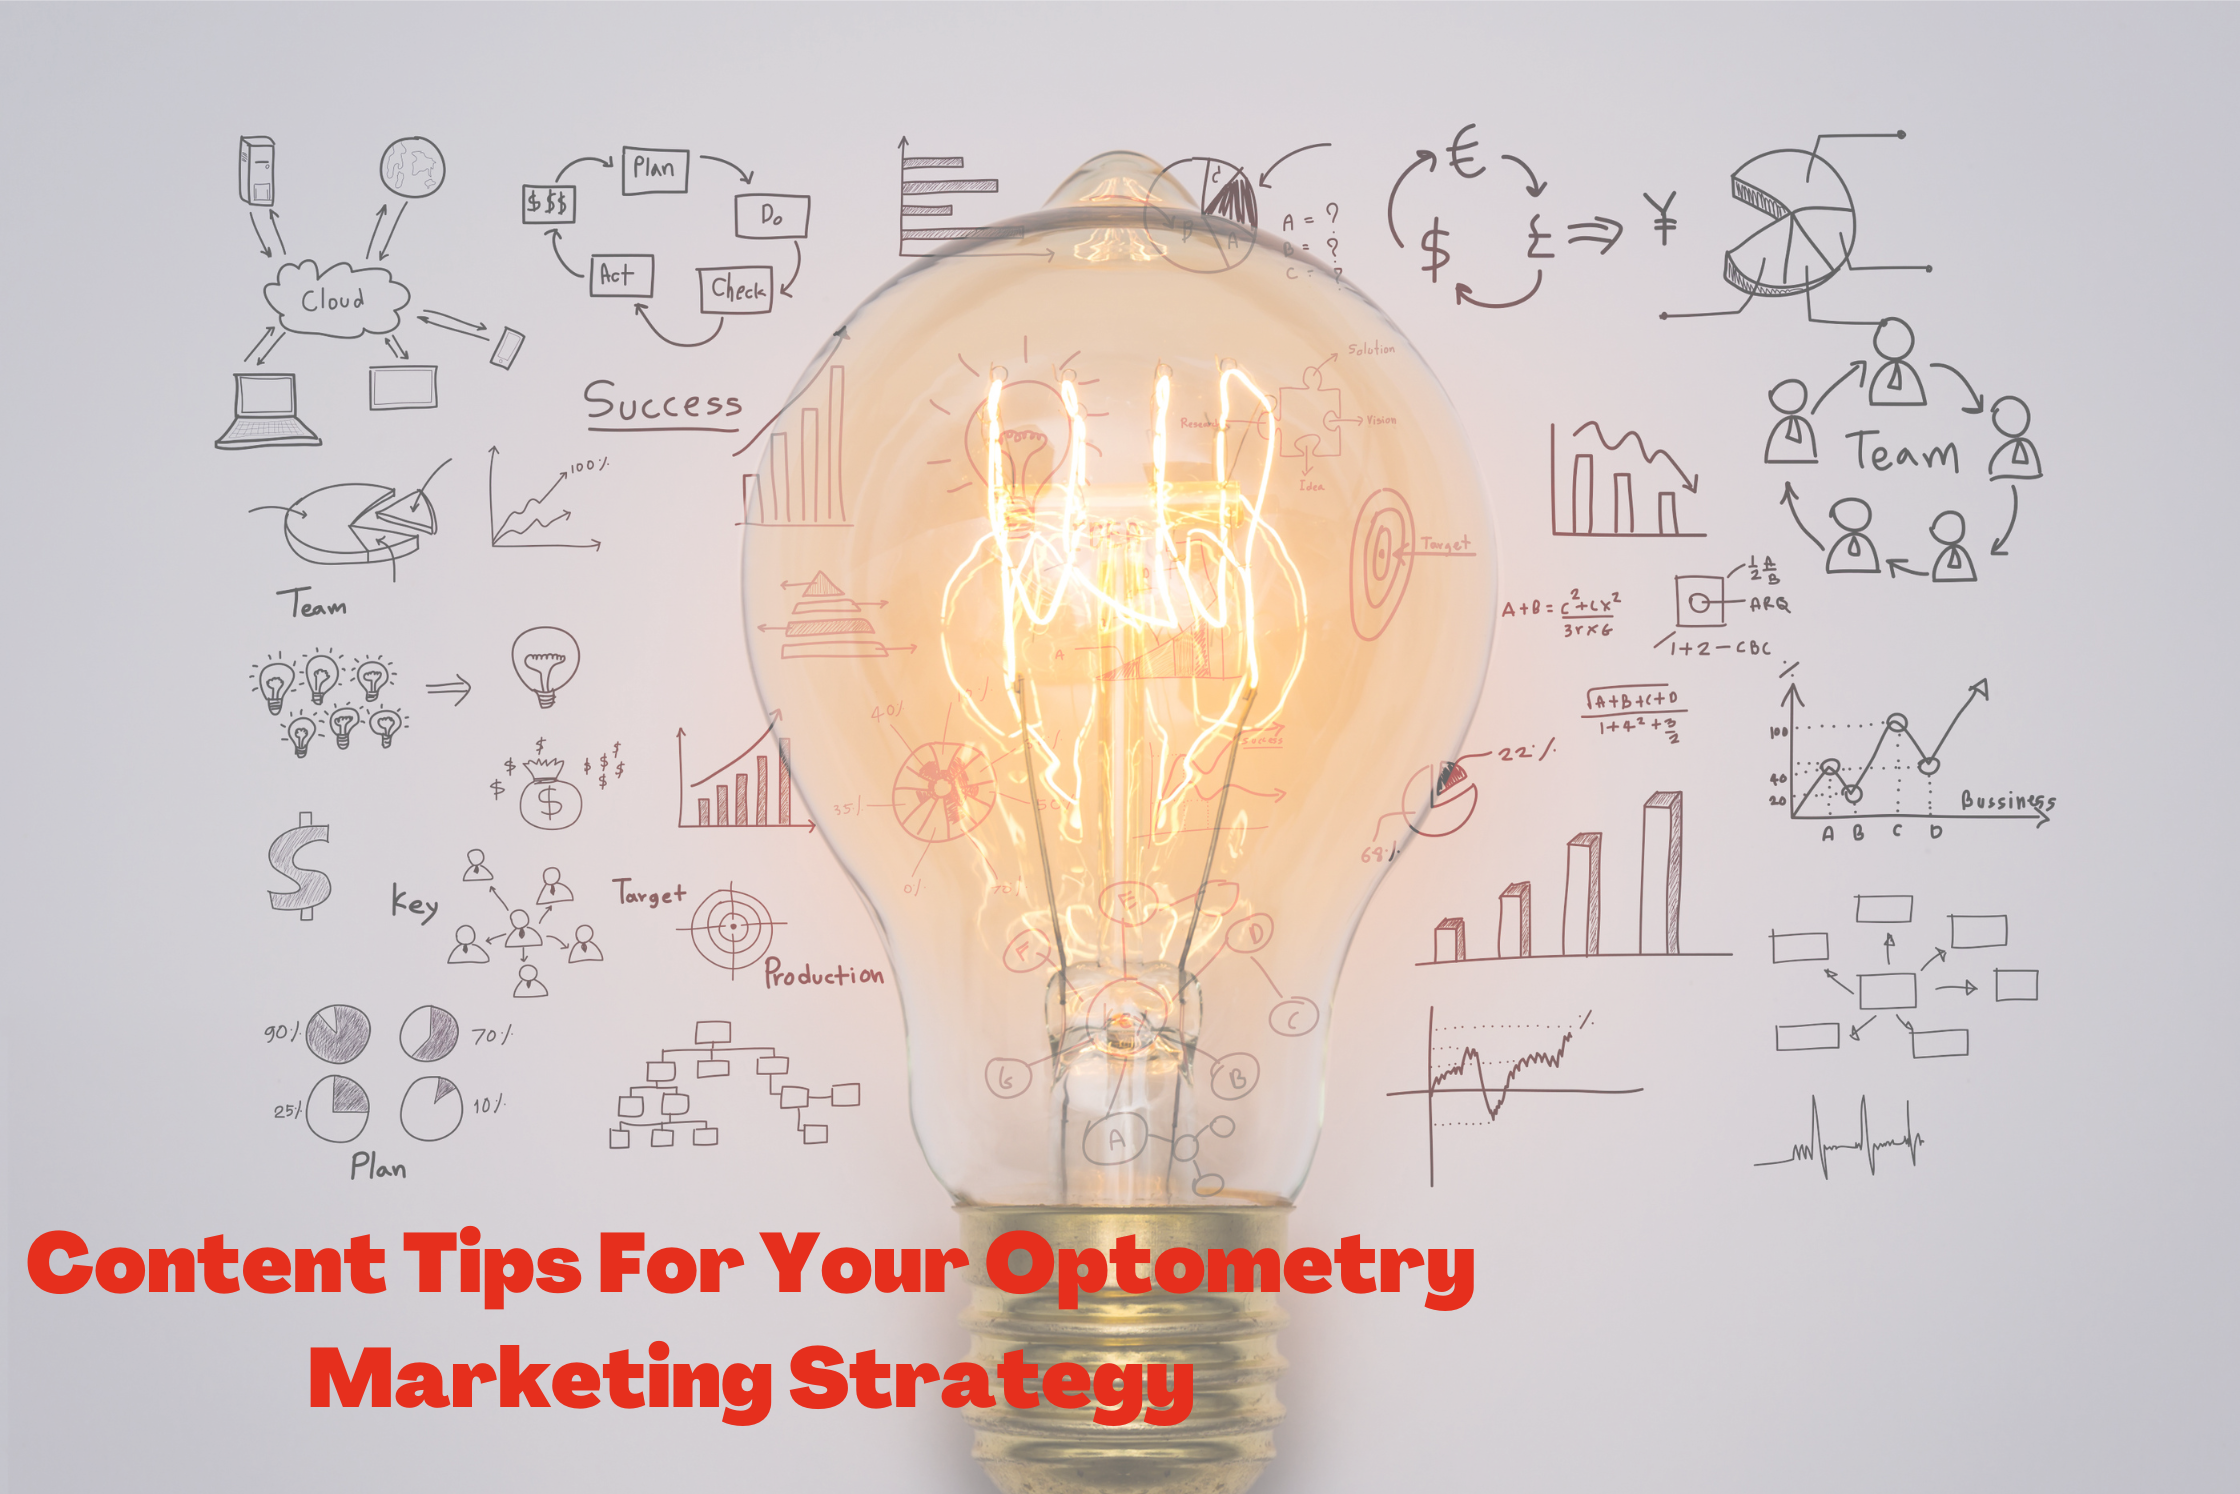 Content Tips For Your Optometry Marketing Strategy